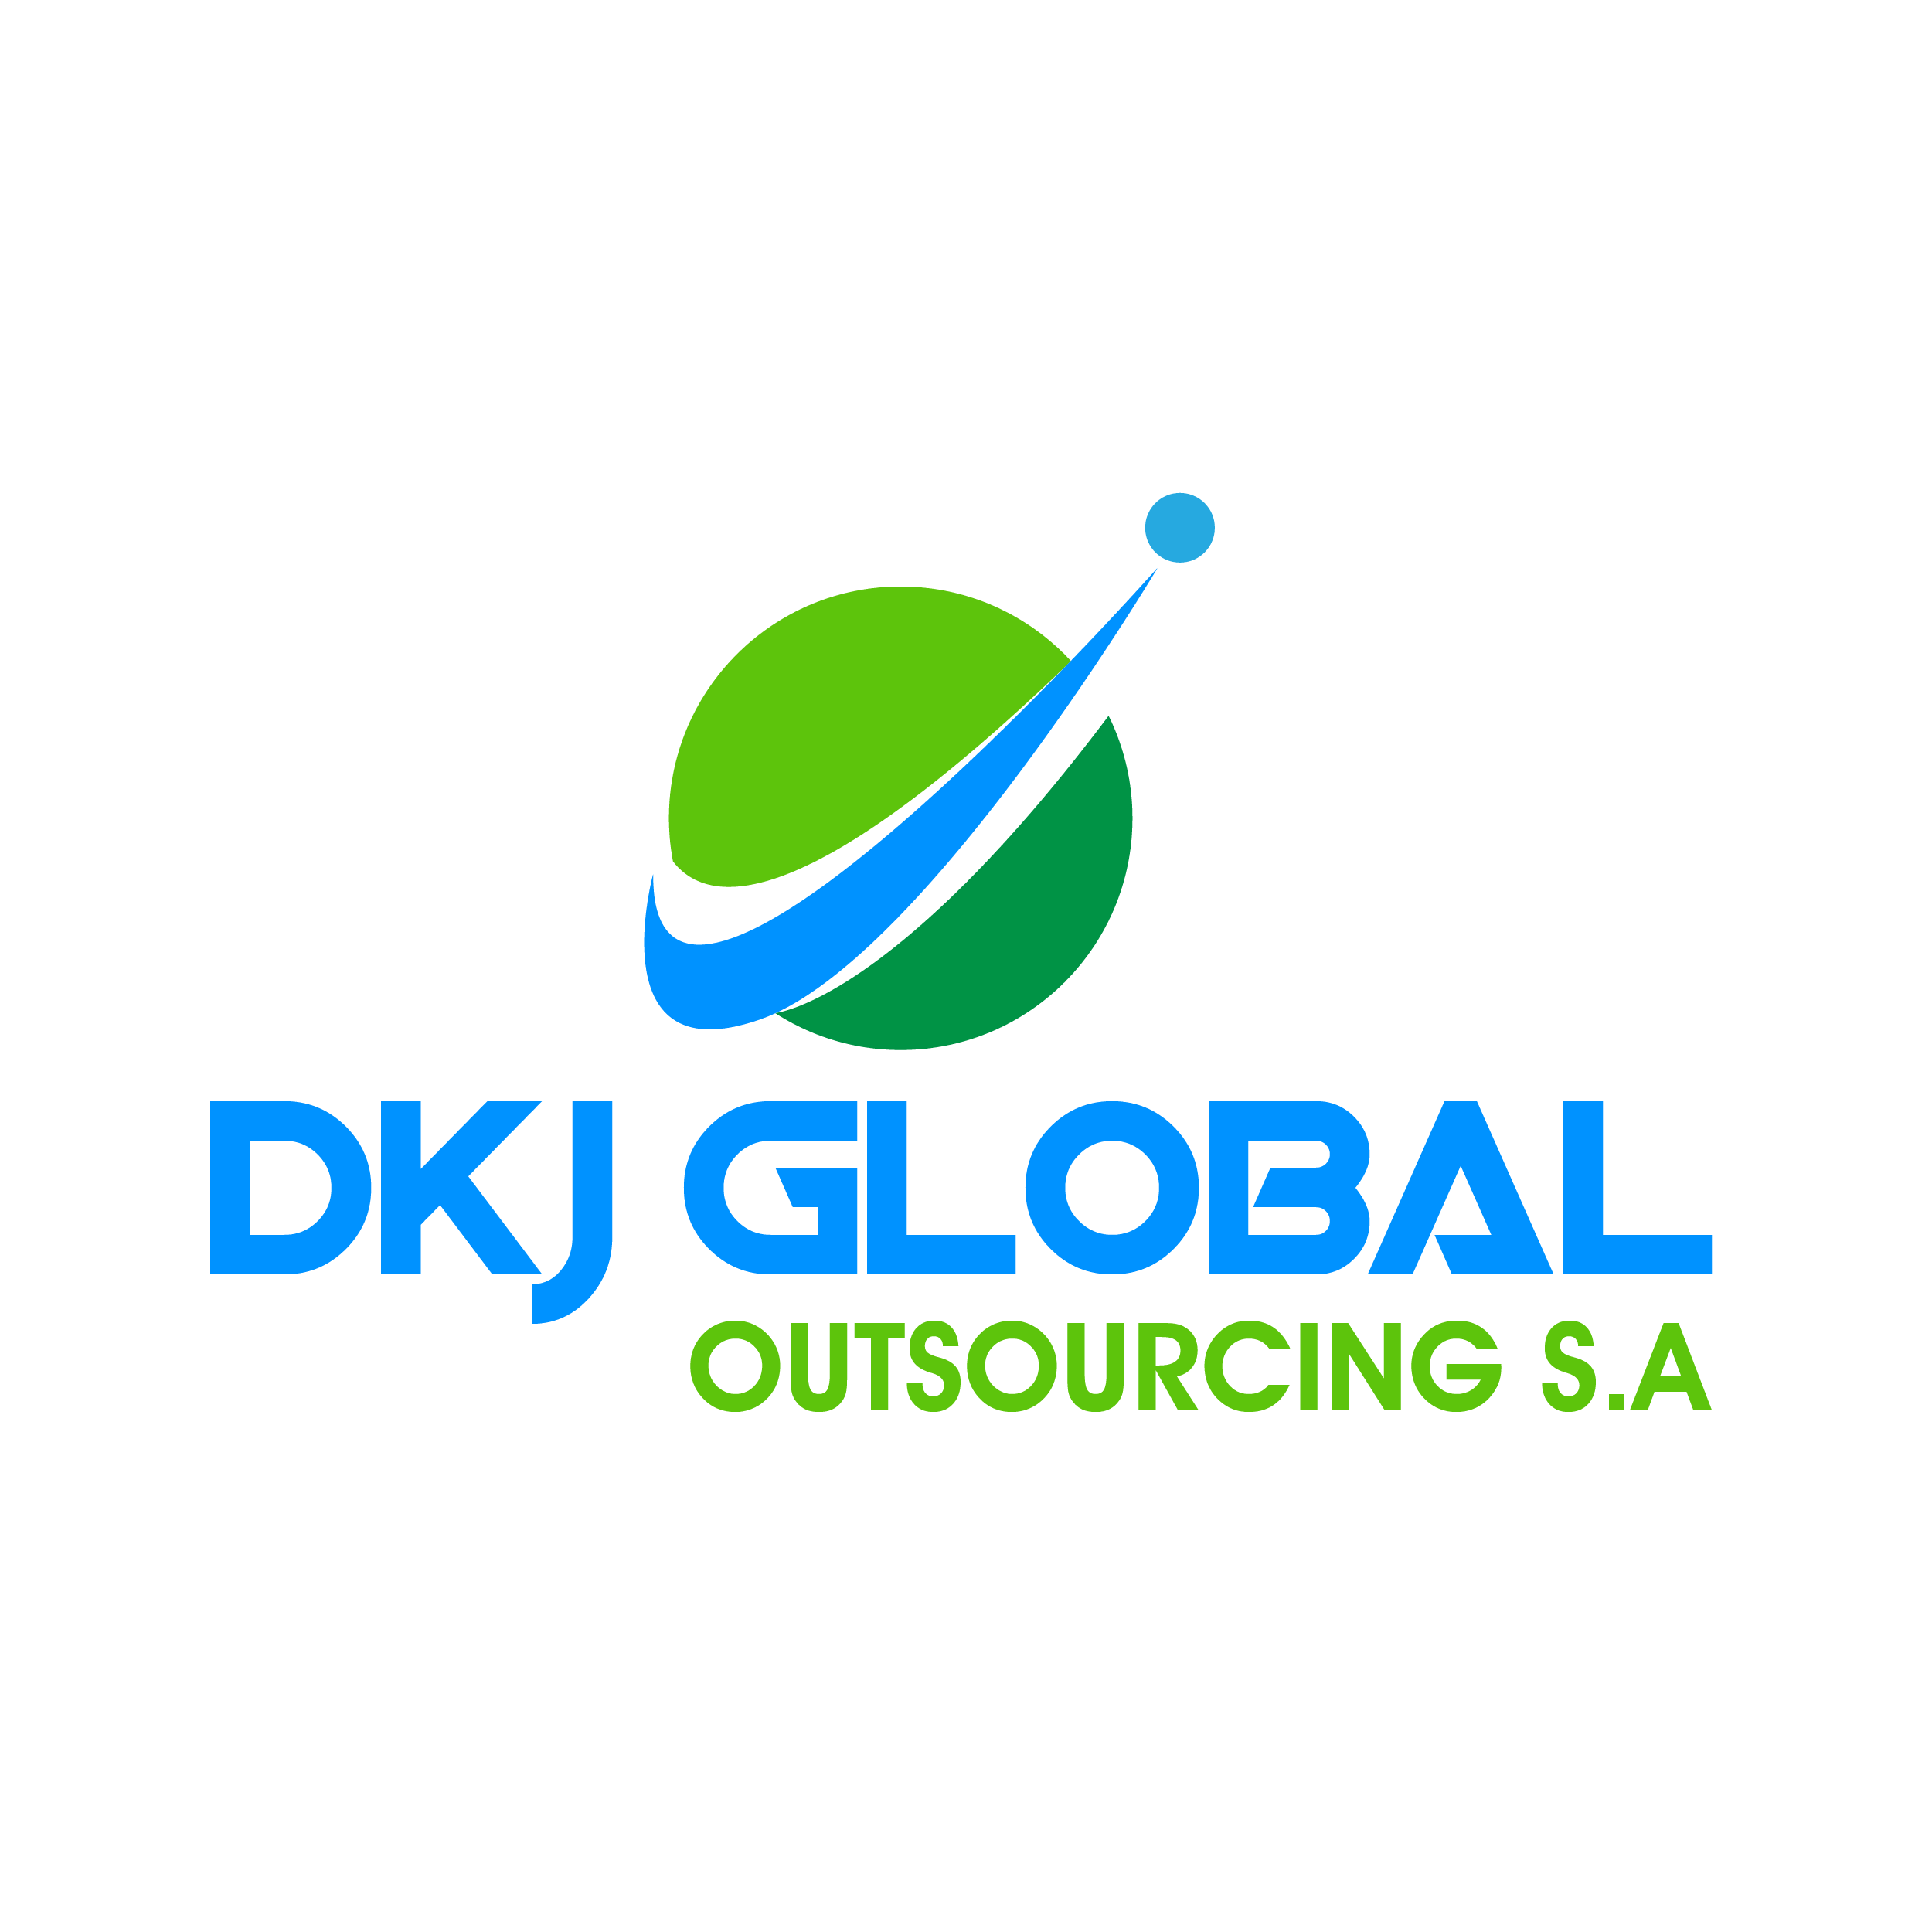 DKJ Global Outsourcing S.A